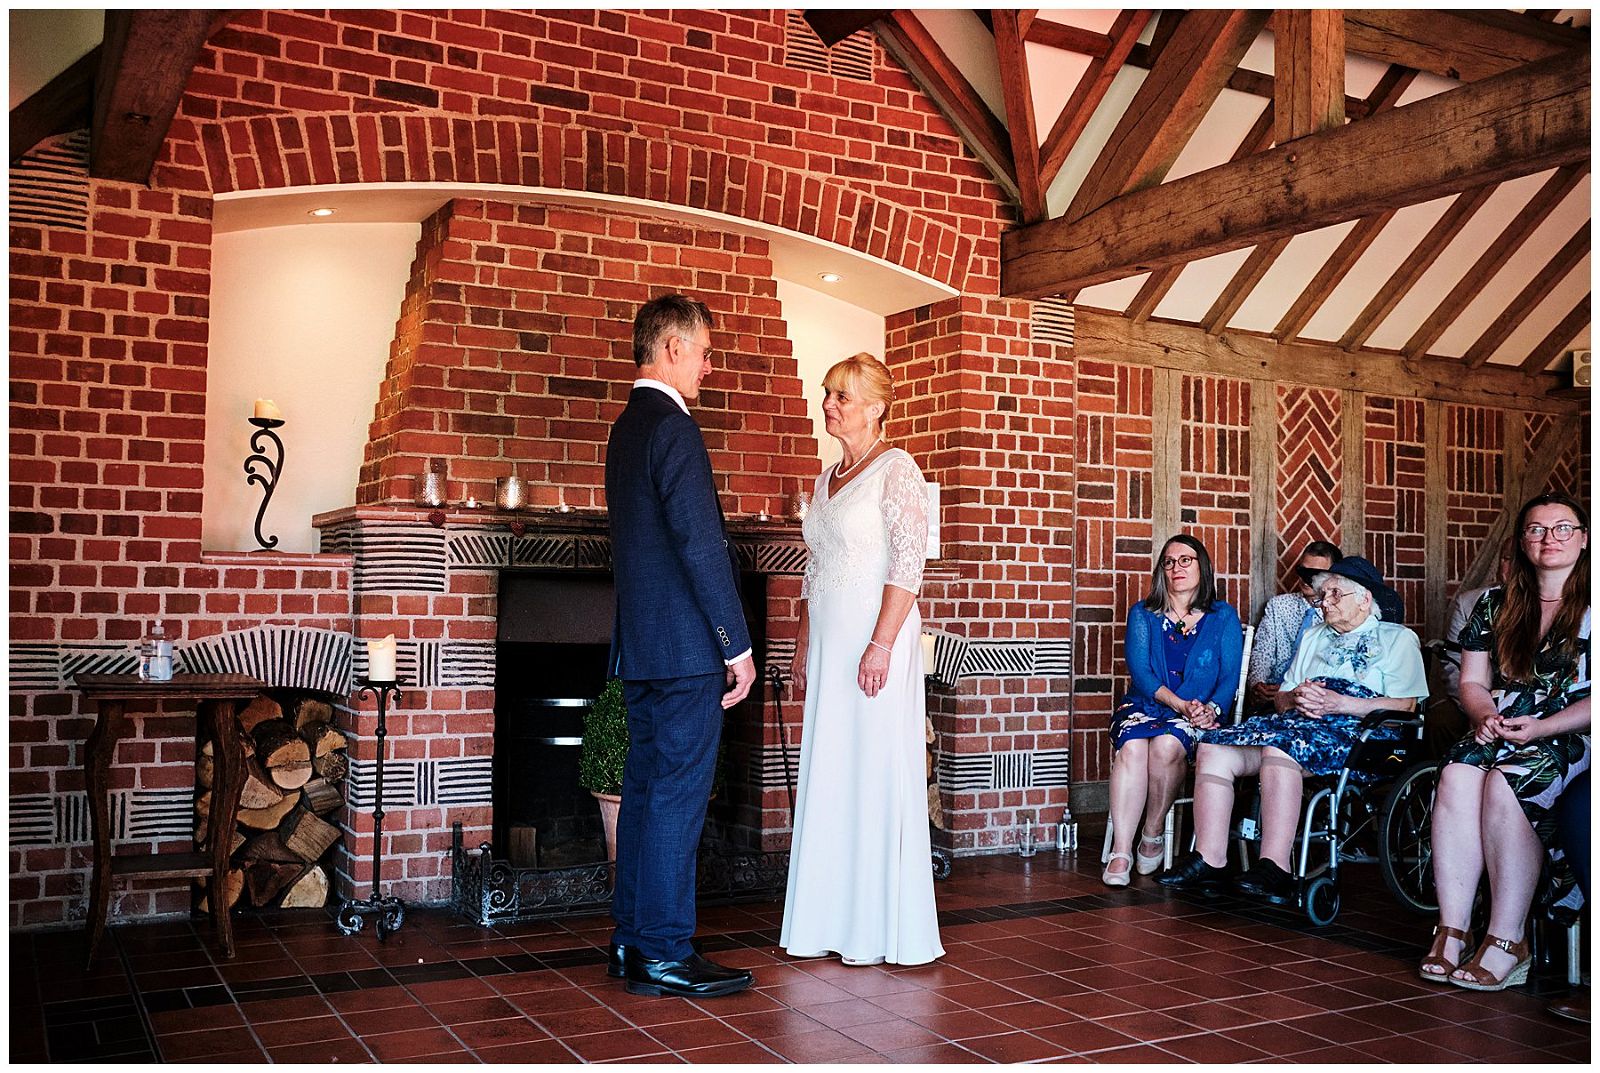 Capturing the emotions and moments of the wedding ceremony in the Garden Pavilion at Goldstone Hall in Shropshire by Documentary Wedding Photographer Stuart James